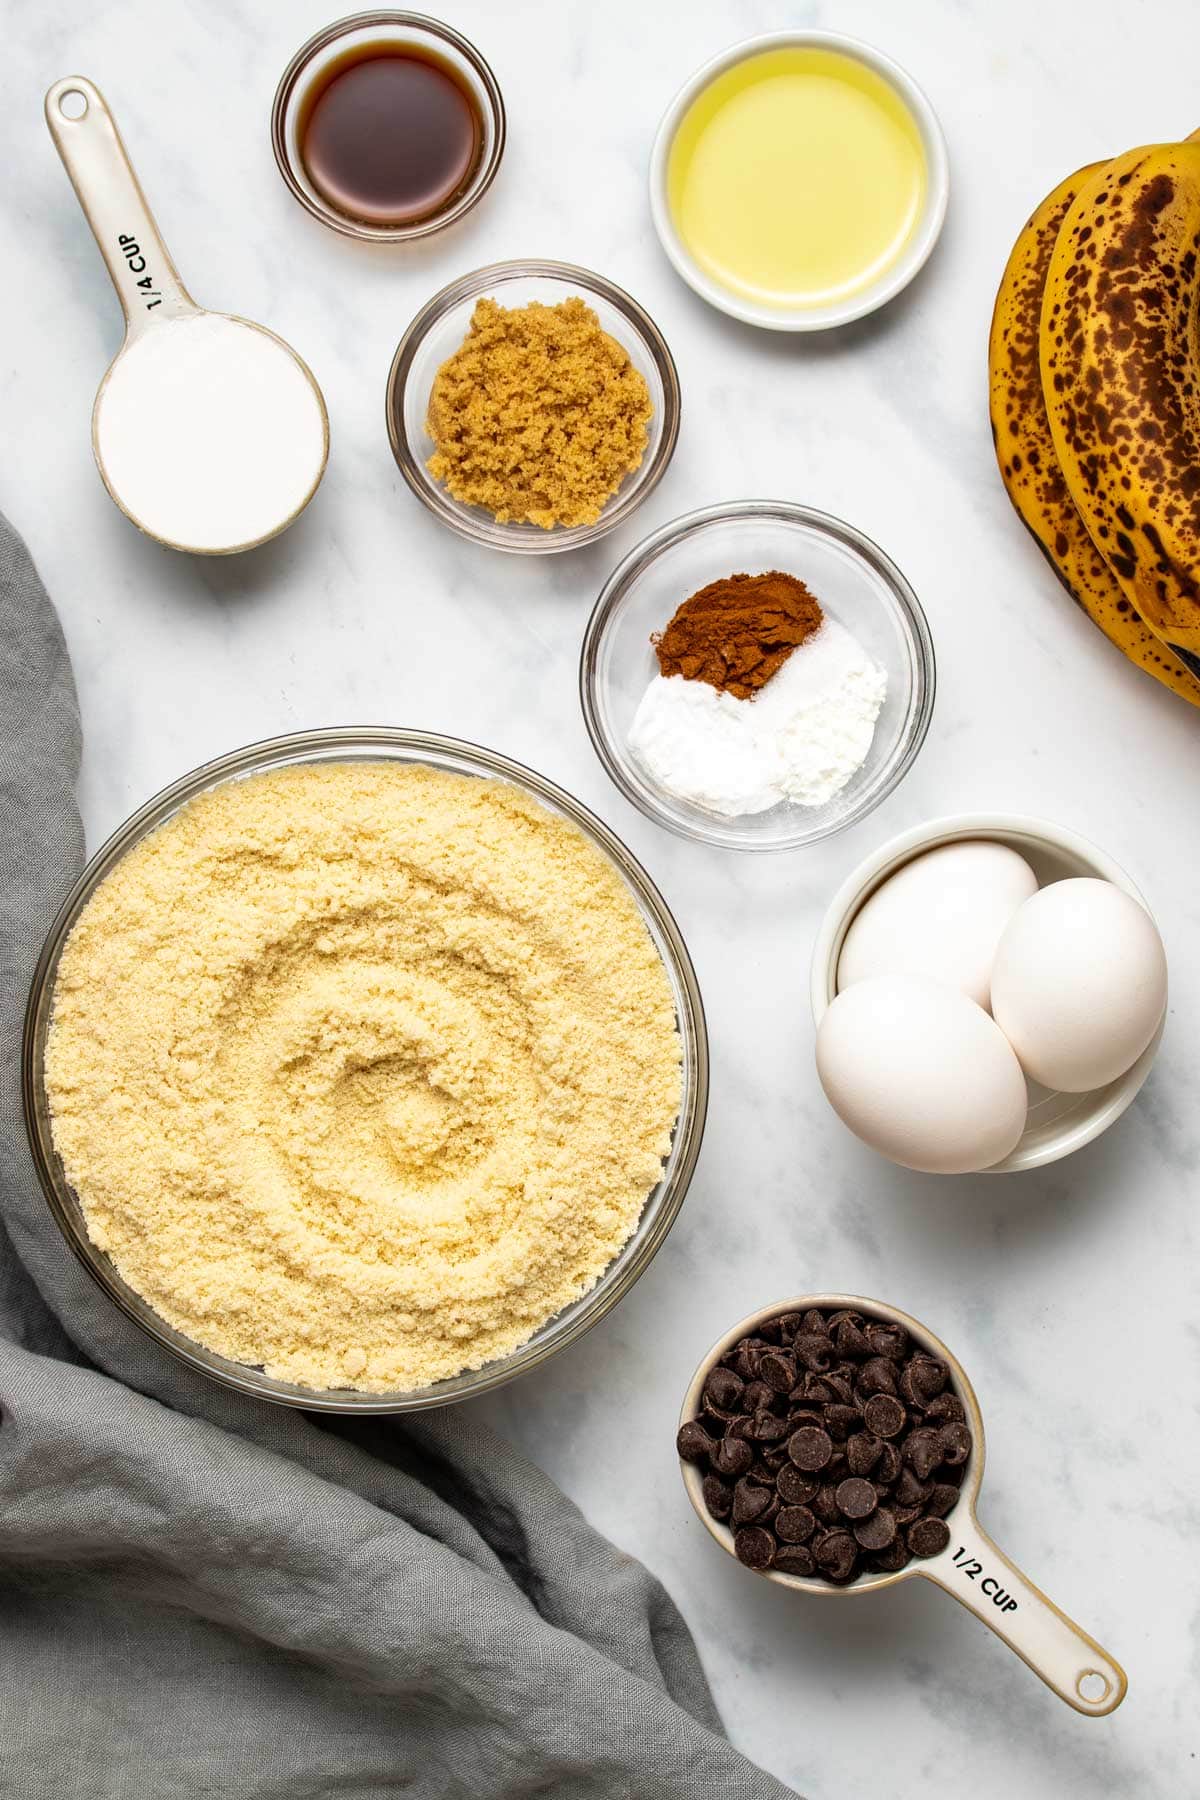 Ingredients needed to make almond flour banana bread, viewed from overhead.